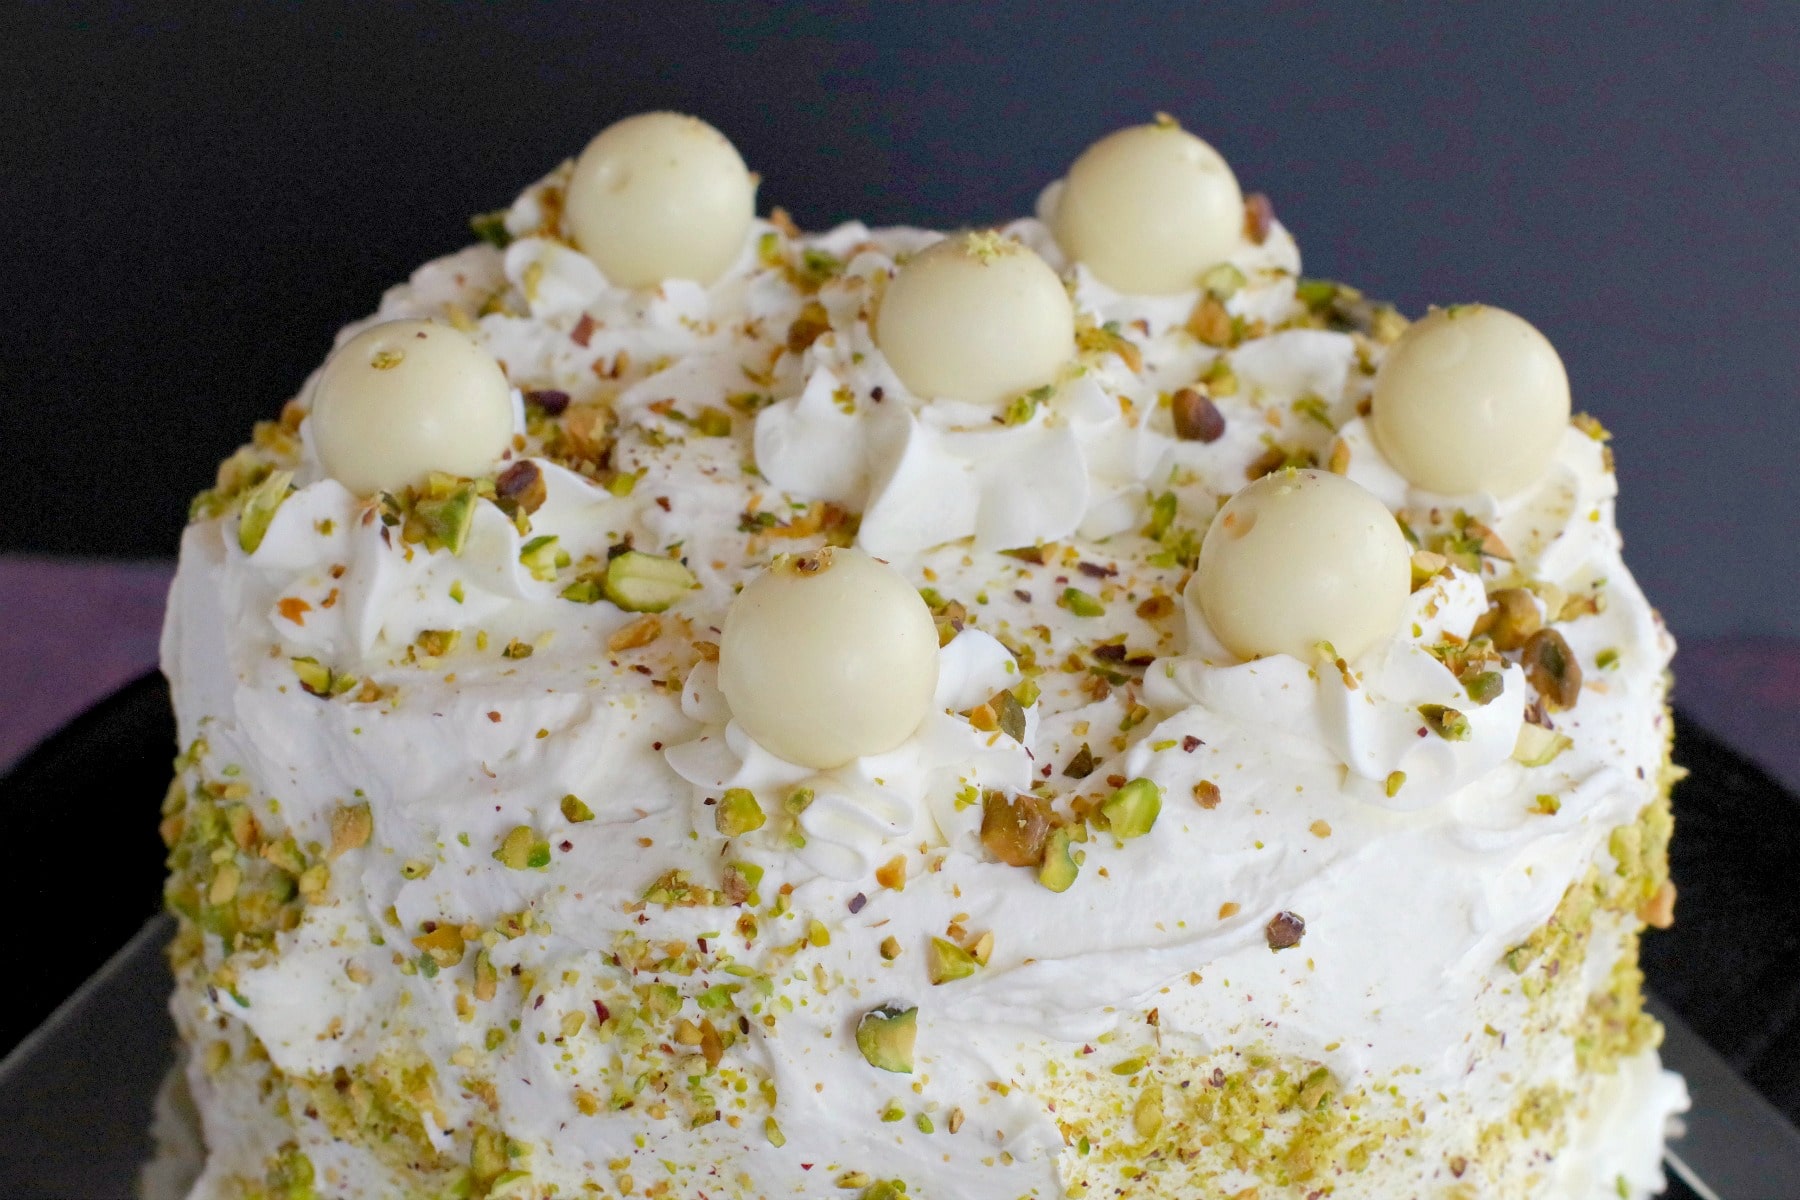 Top of White Chocolate Pistachio cake on black stand